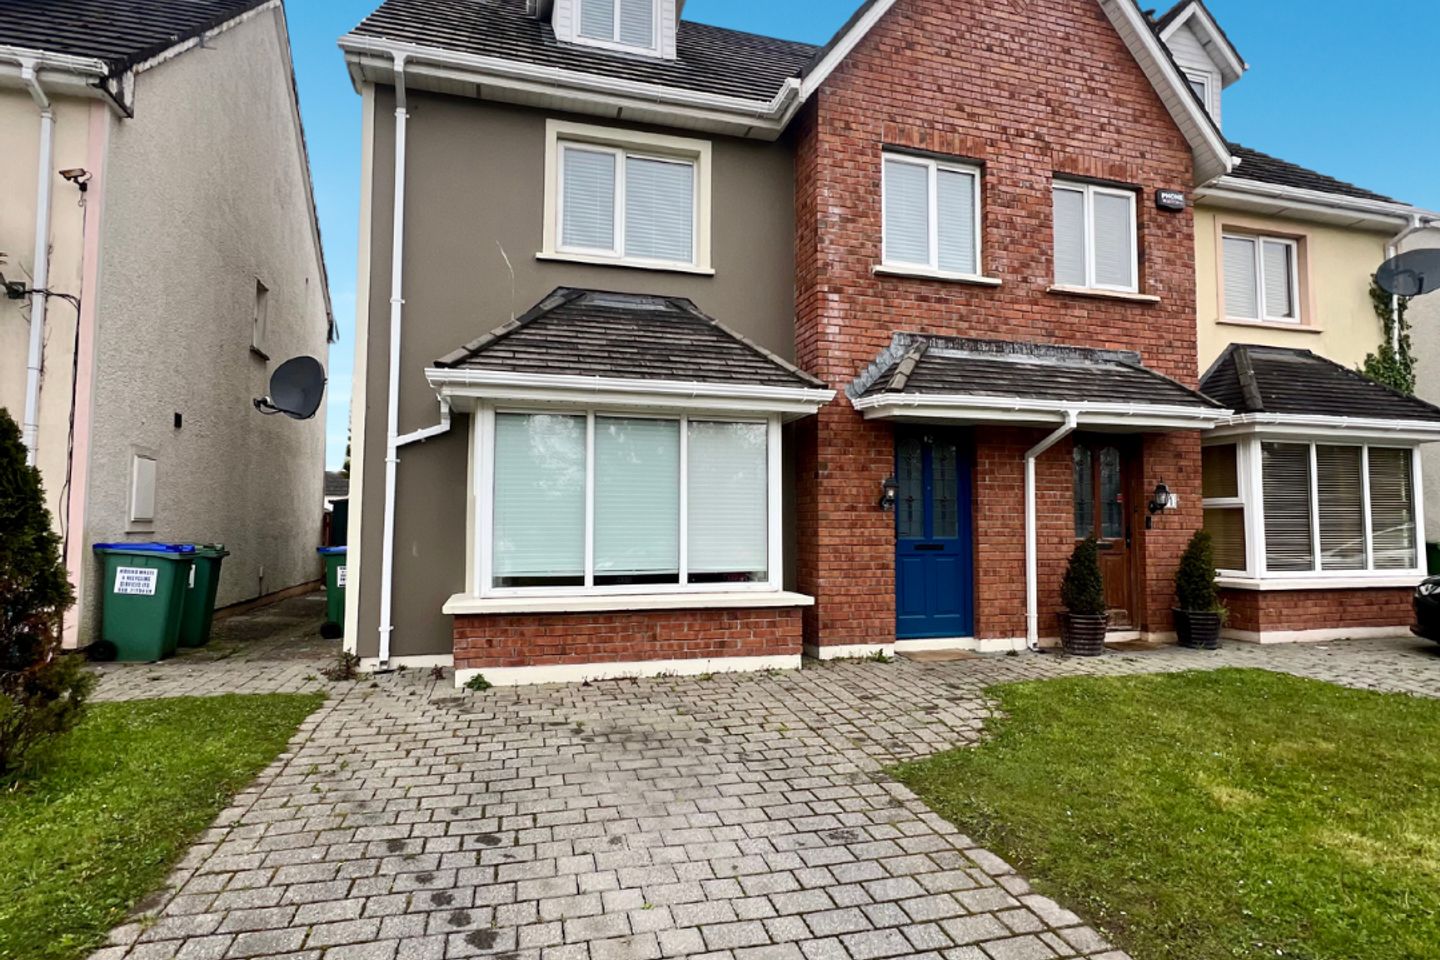 12 Cois Abhann, Caherweesheen, Tralee, Co. Kerry, V92D7PR